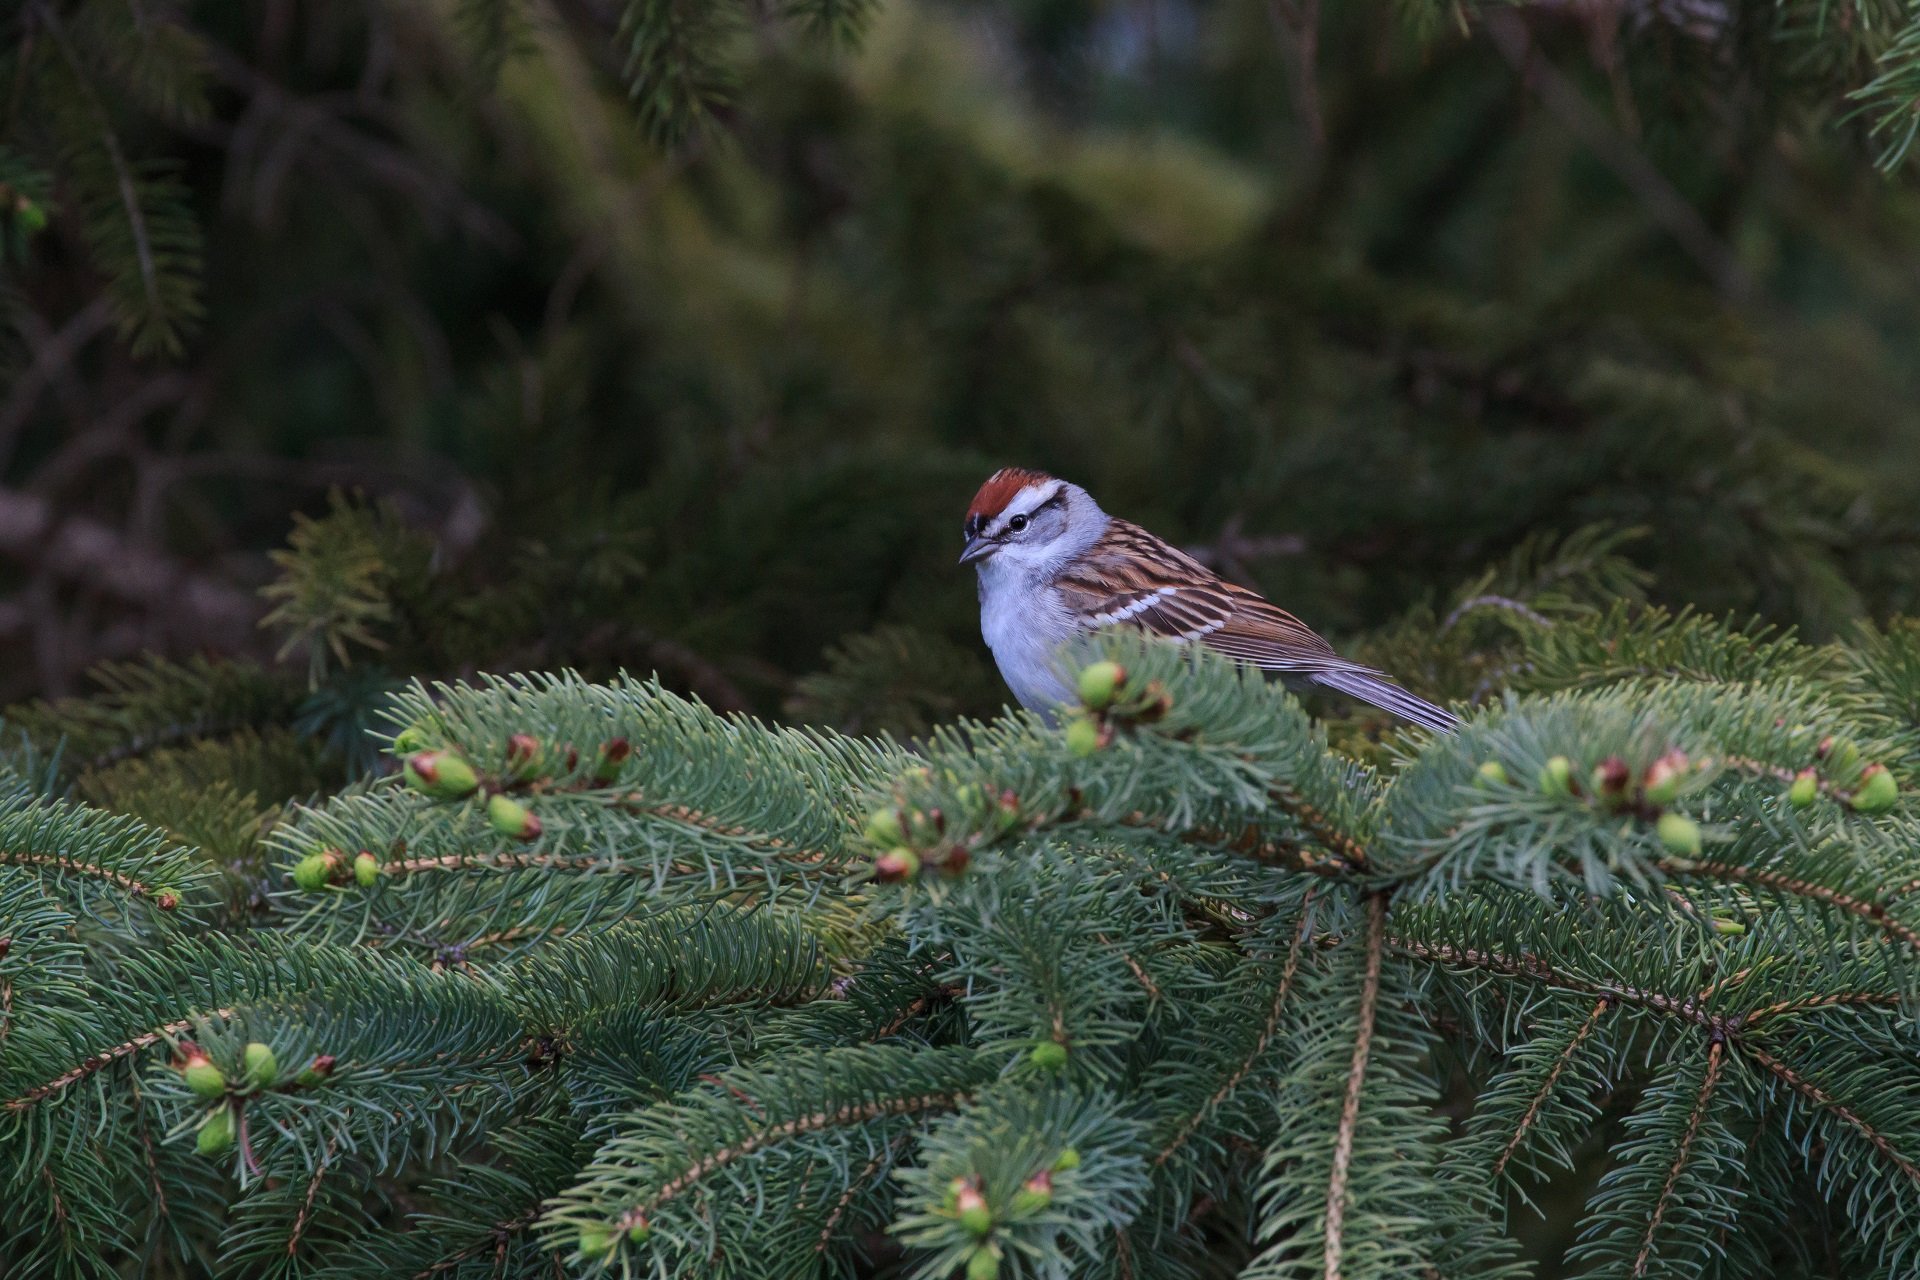 A Chipping Sparrow sits on an evergreen branch at Drumlin Farm.